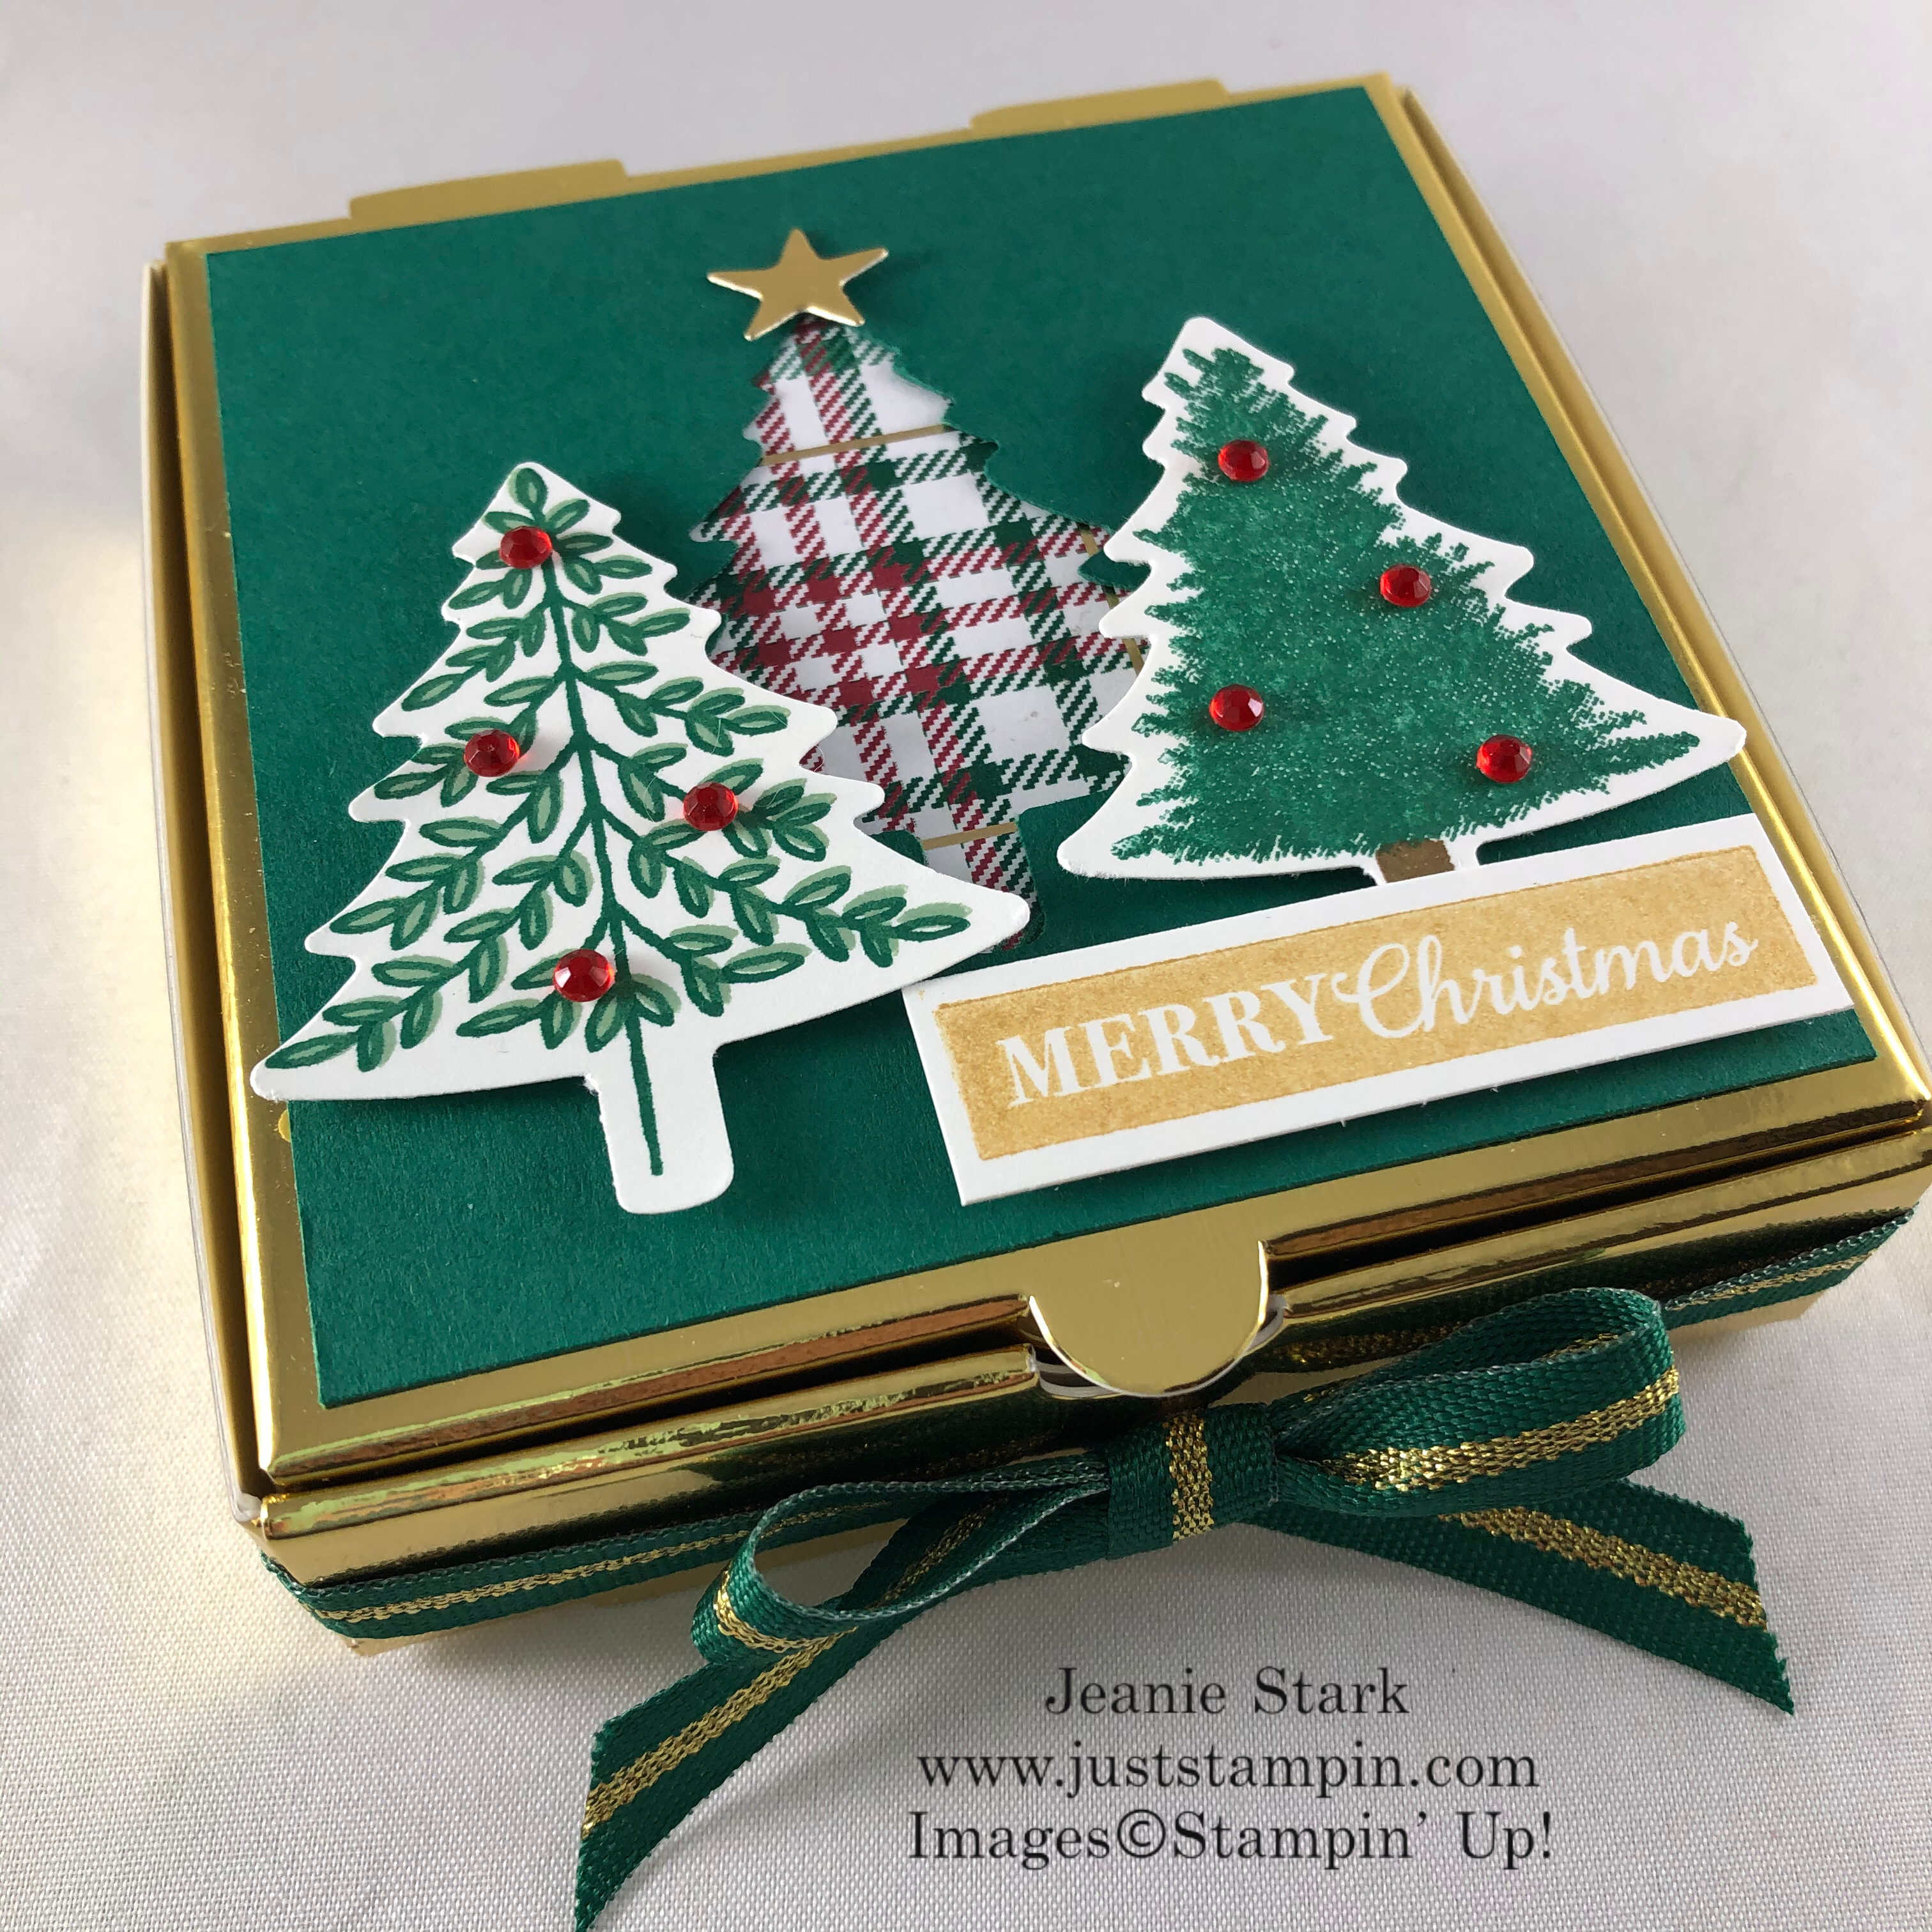 Stampin' Up! Perfectly Plaid Pizza Box Christmas gift idea - Jeanie Stark StampinUp